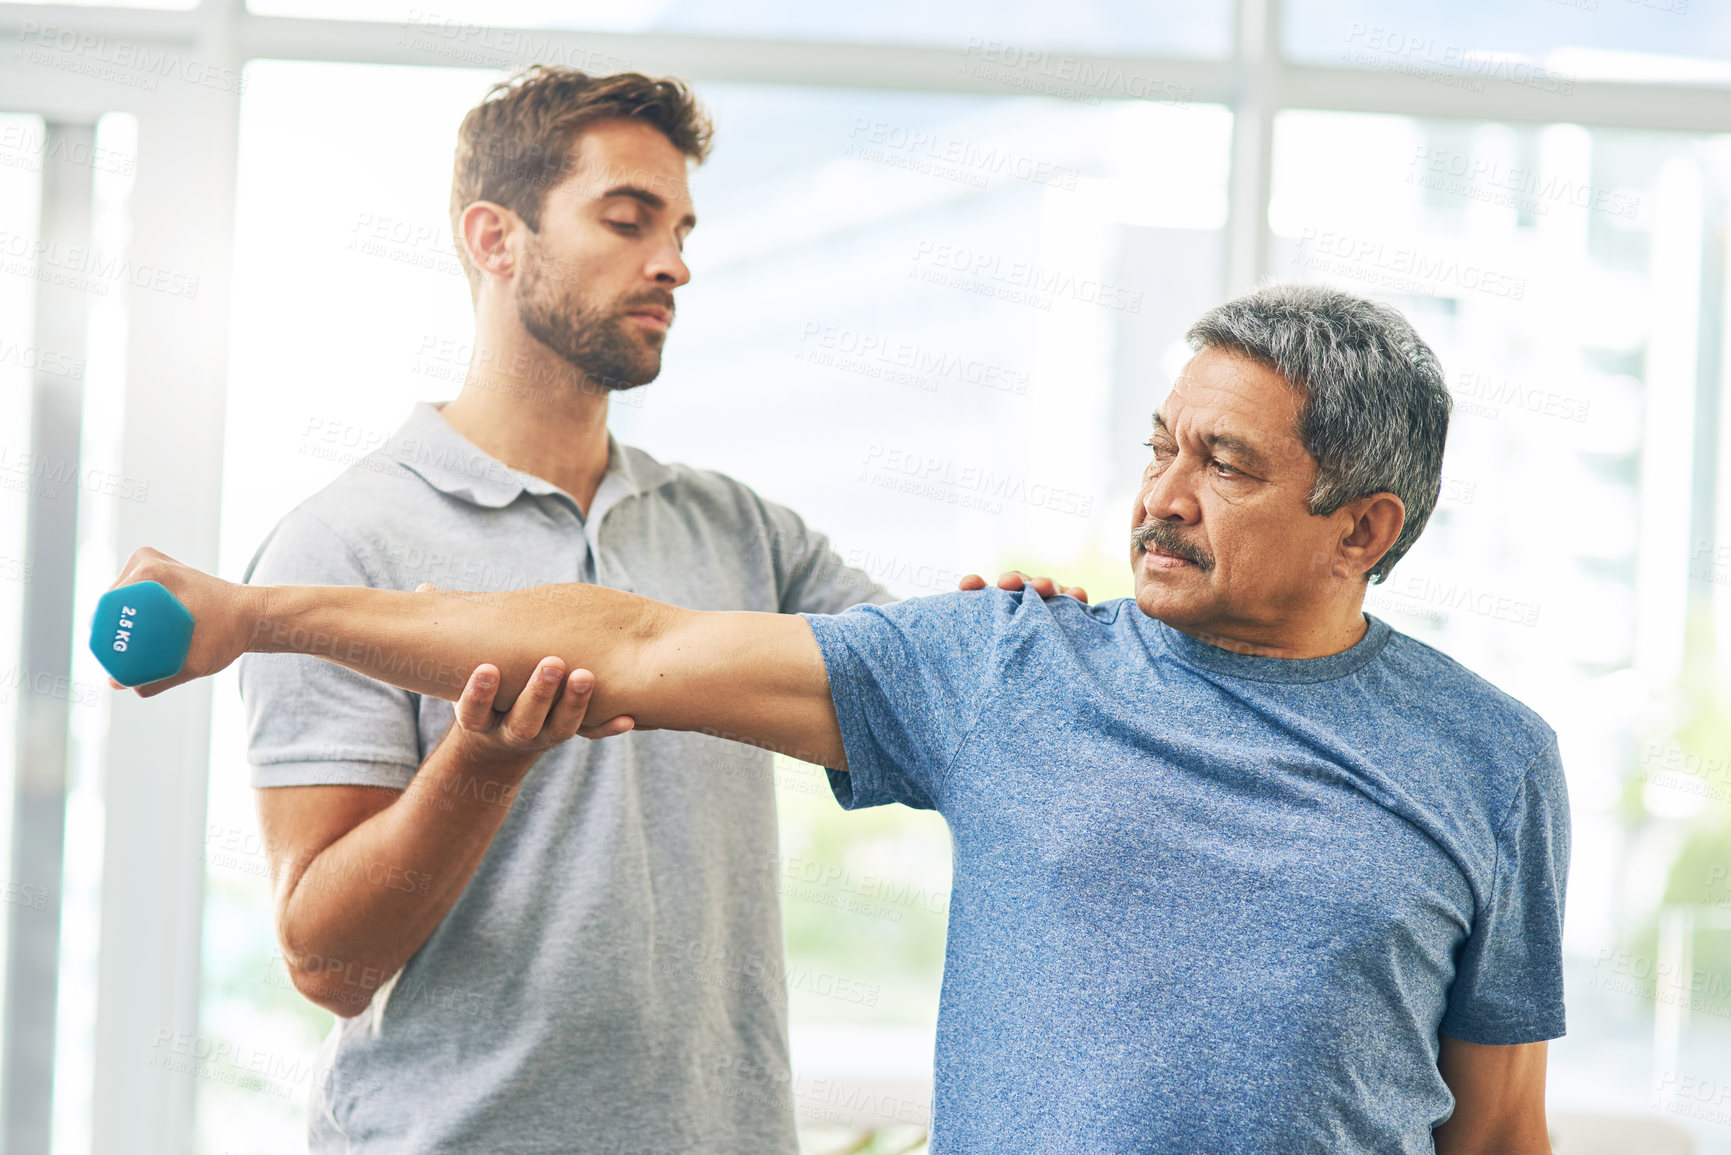 Buy stock photo Cropped shot of a young male physiotherapist assisting a senior patient in recovery